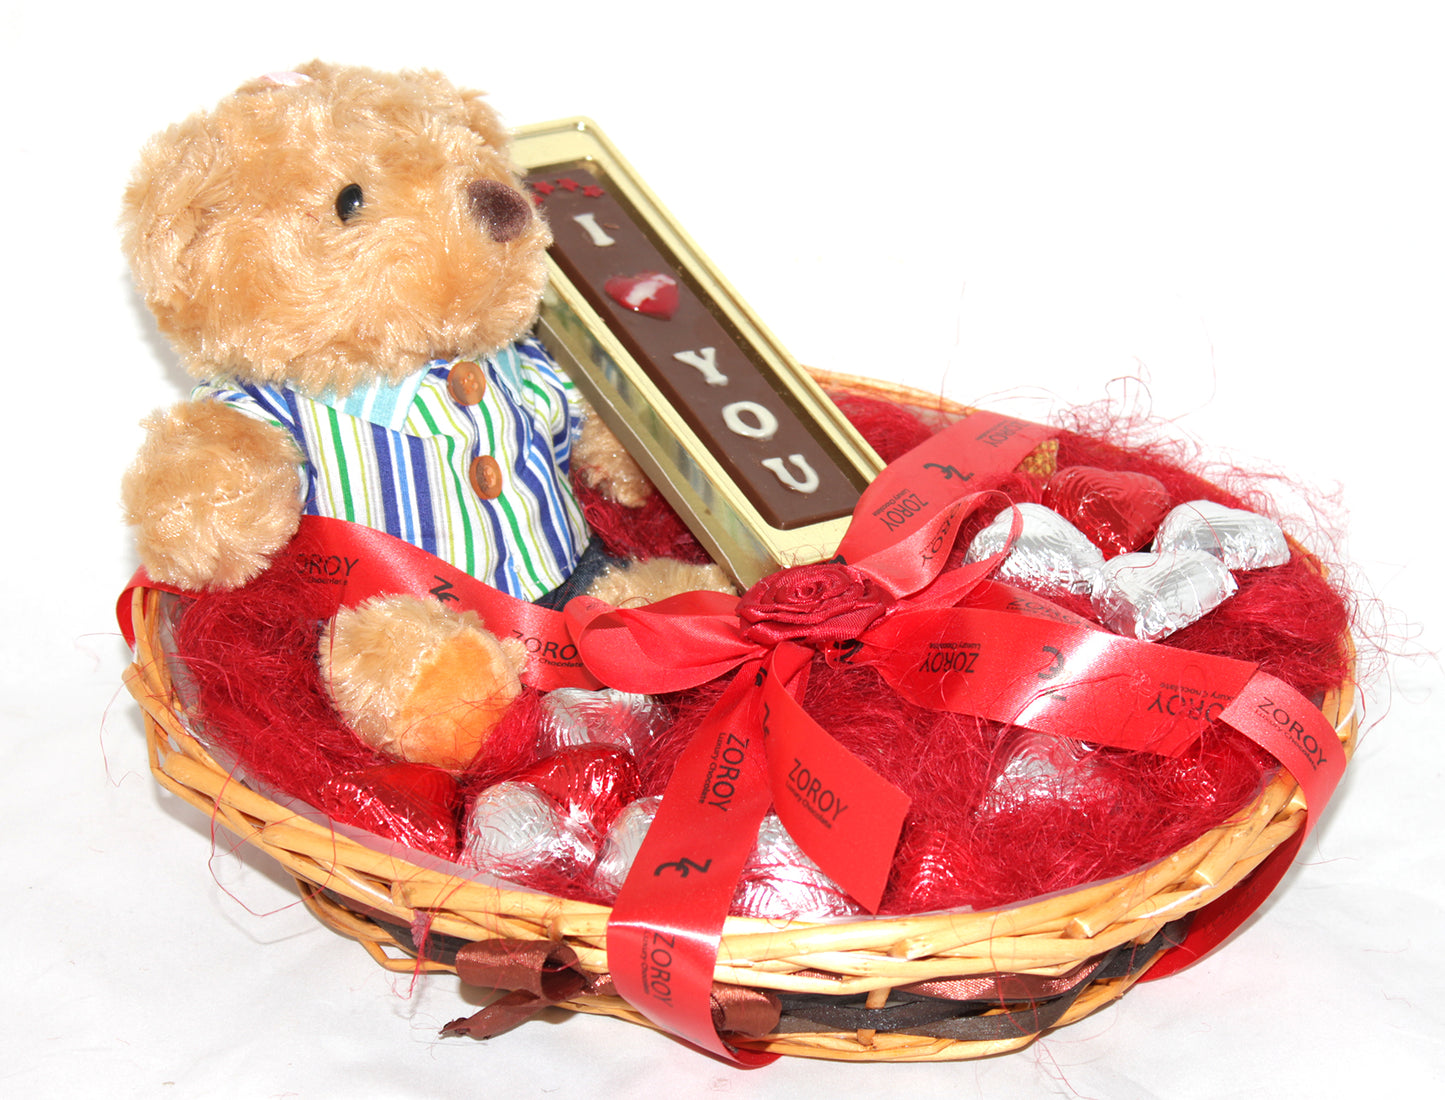 The Romance Him Gift Hamper with 7 inch teddy bear, I love you bar, and 15 milk chocolate hearts